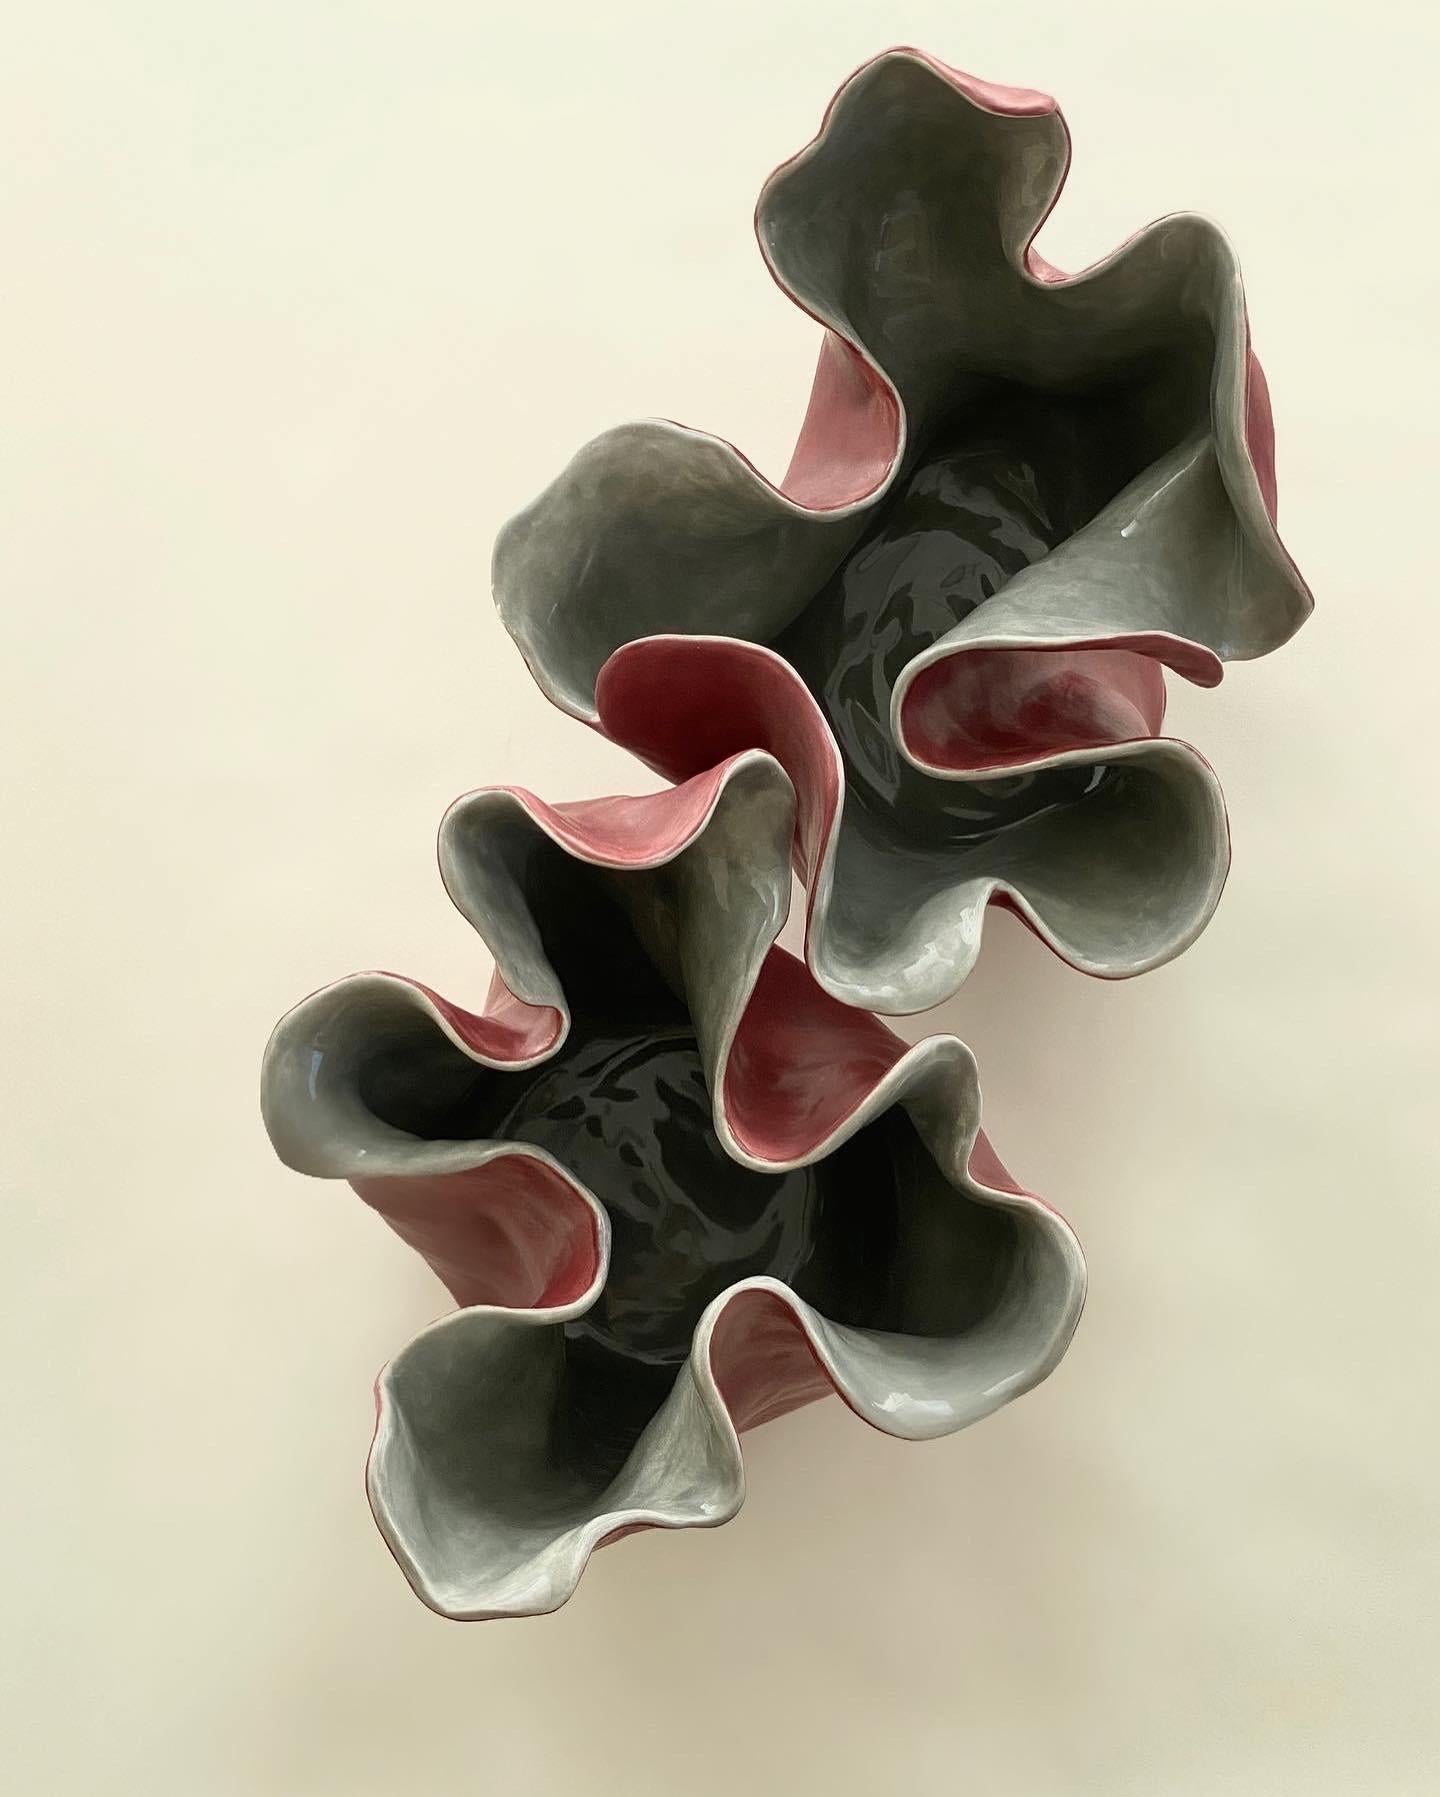 Visceral I, Red and grey, 2020 by Magda von Hanau
From The Visceral Series
Clay Sculpture with Glass Glaze
Dimensions: 12 H x 33 DM in. 

The Visceral series delves into the intricate relationship between the mind and the body, specifically focusing